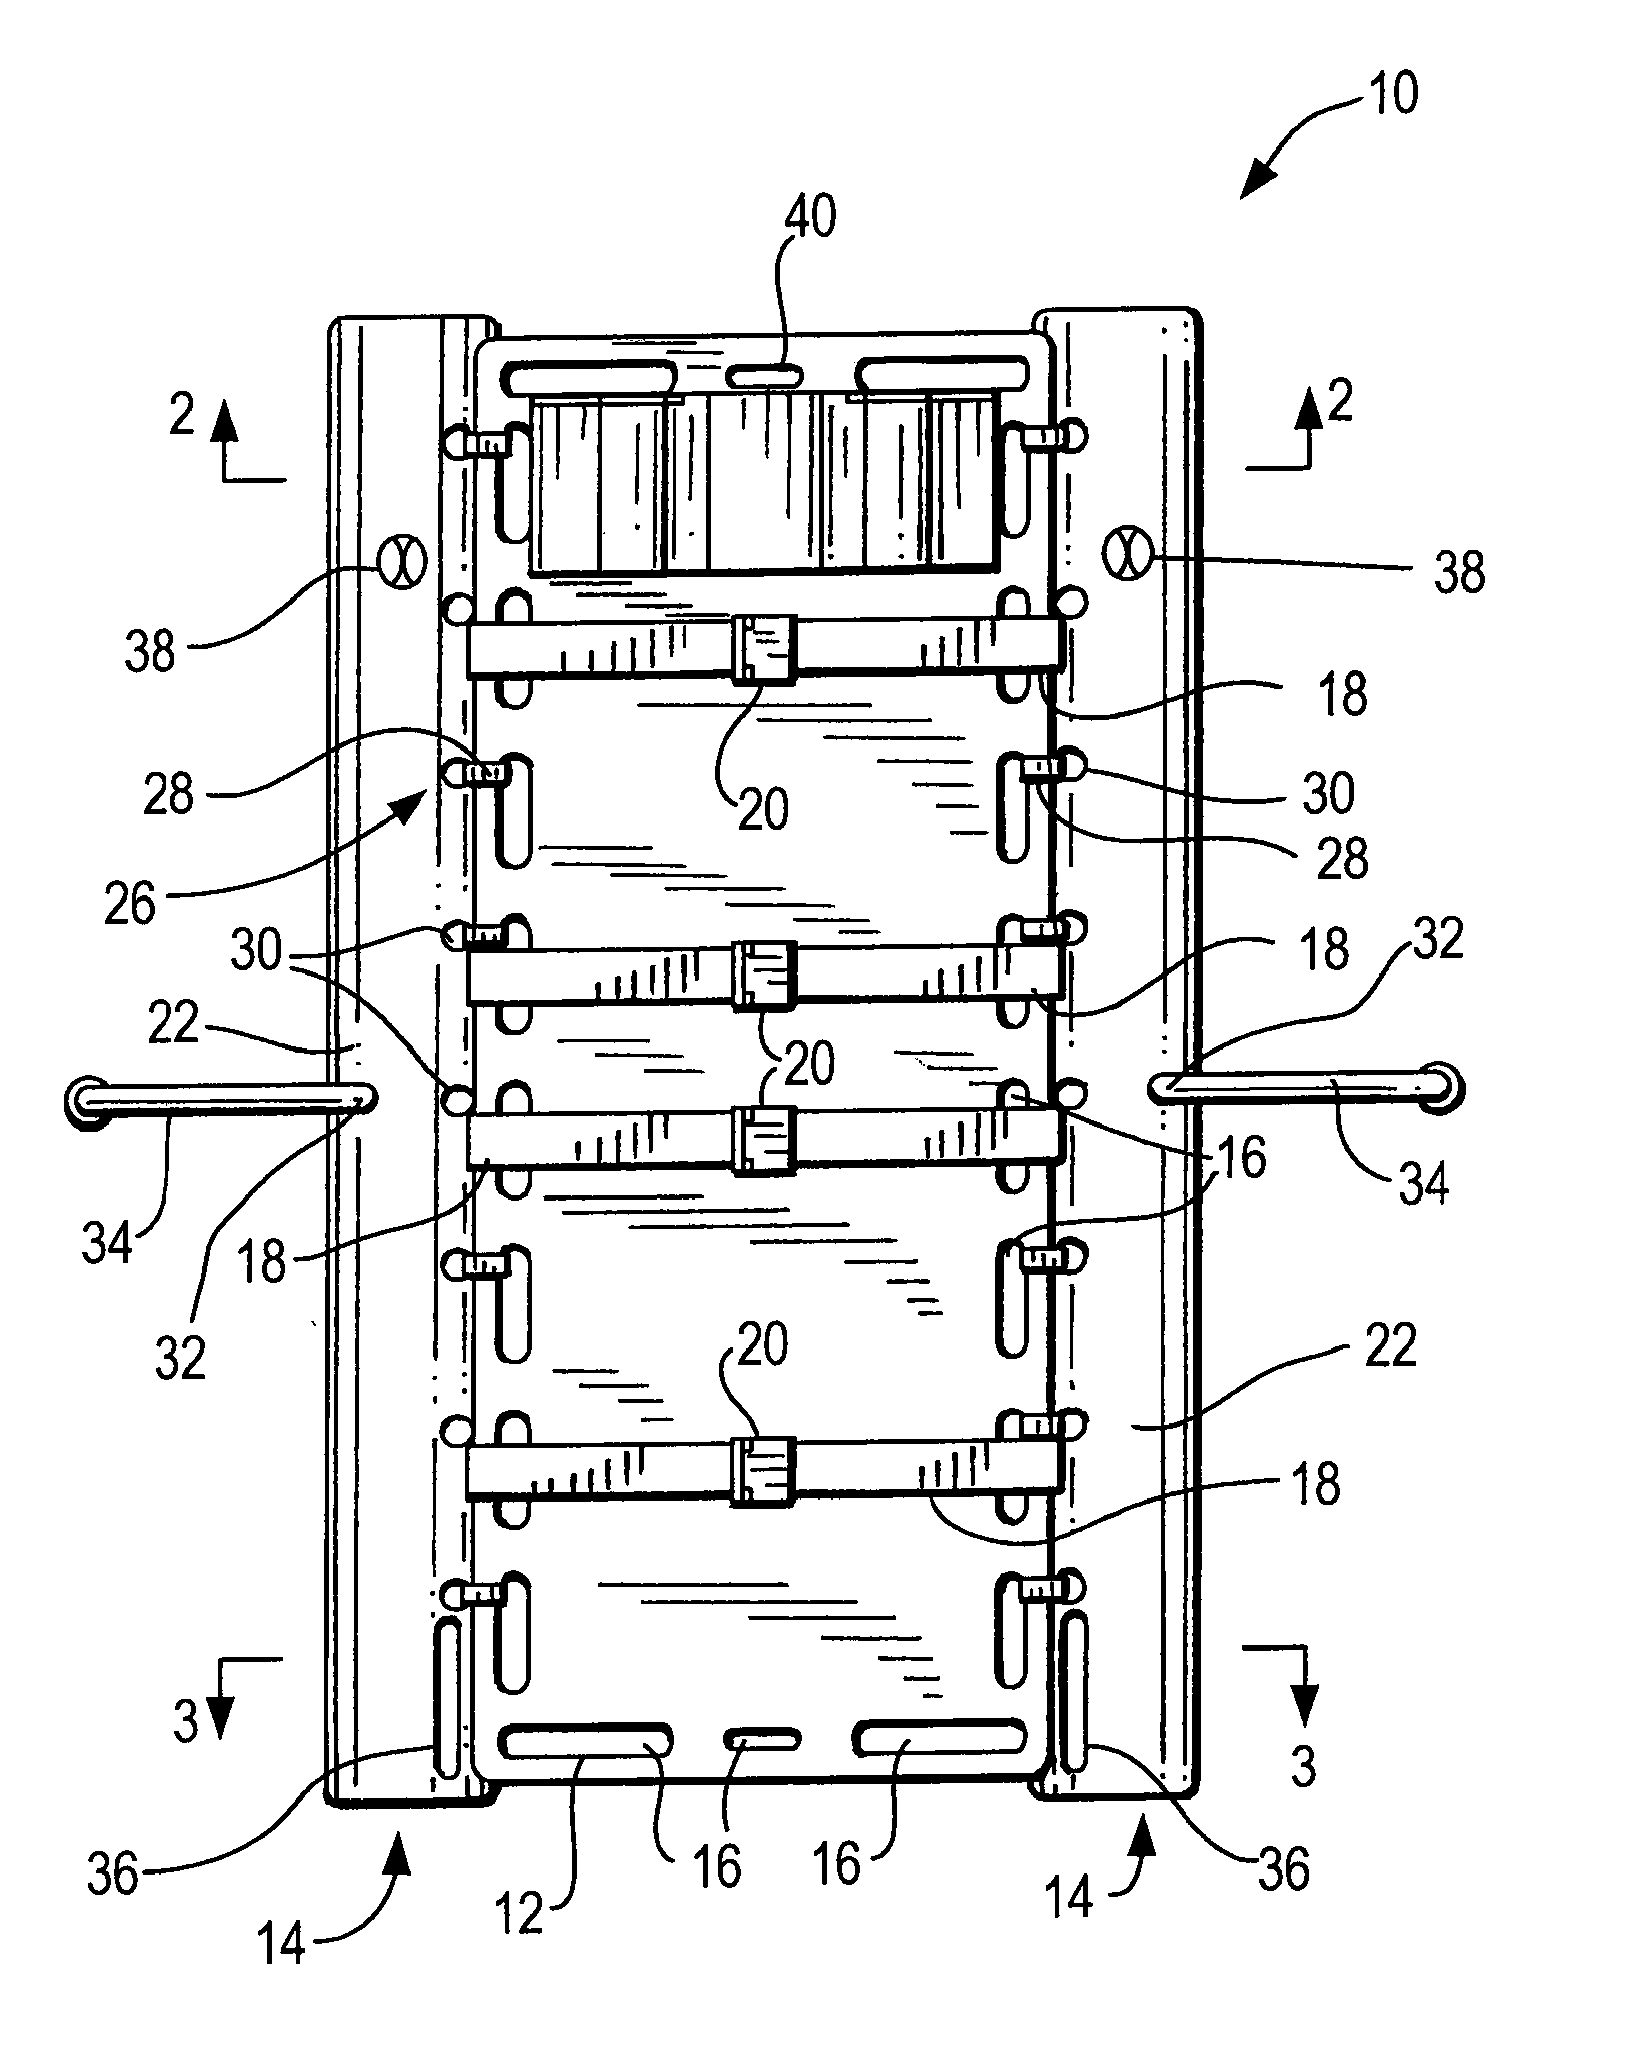 Flotation device for rescue apparatus and method of use